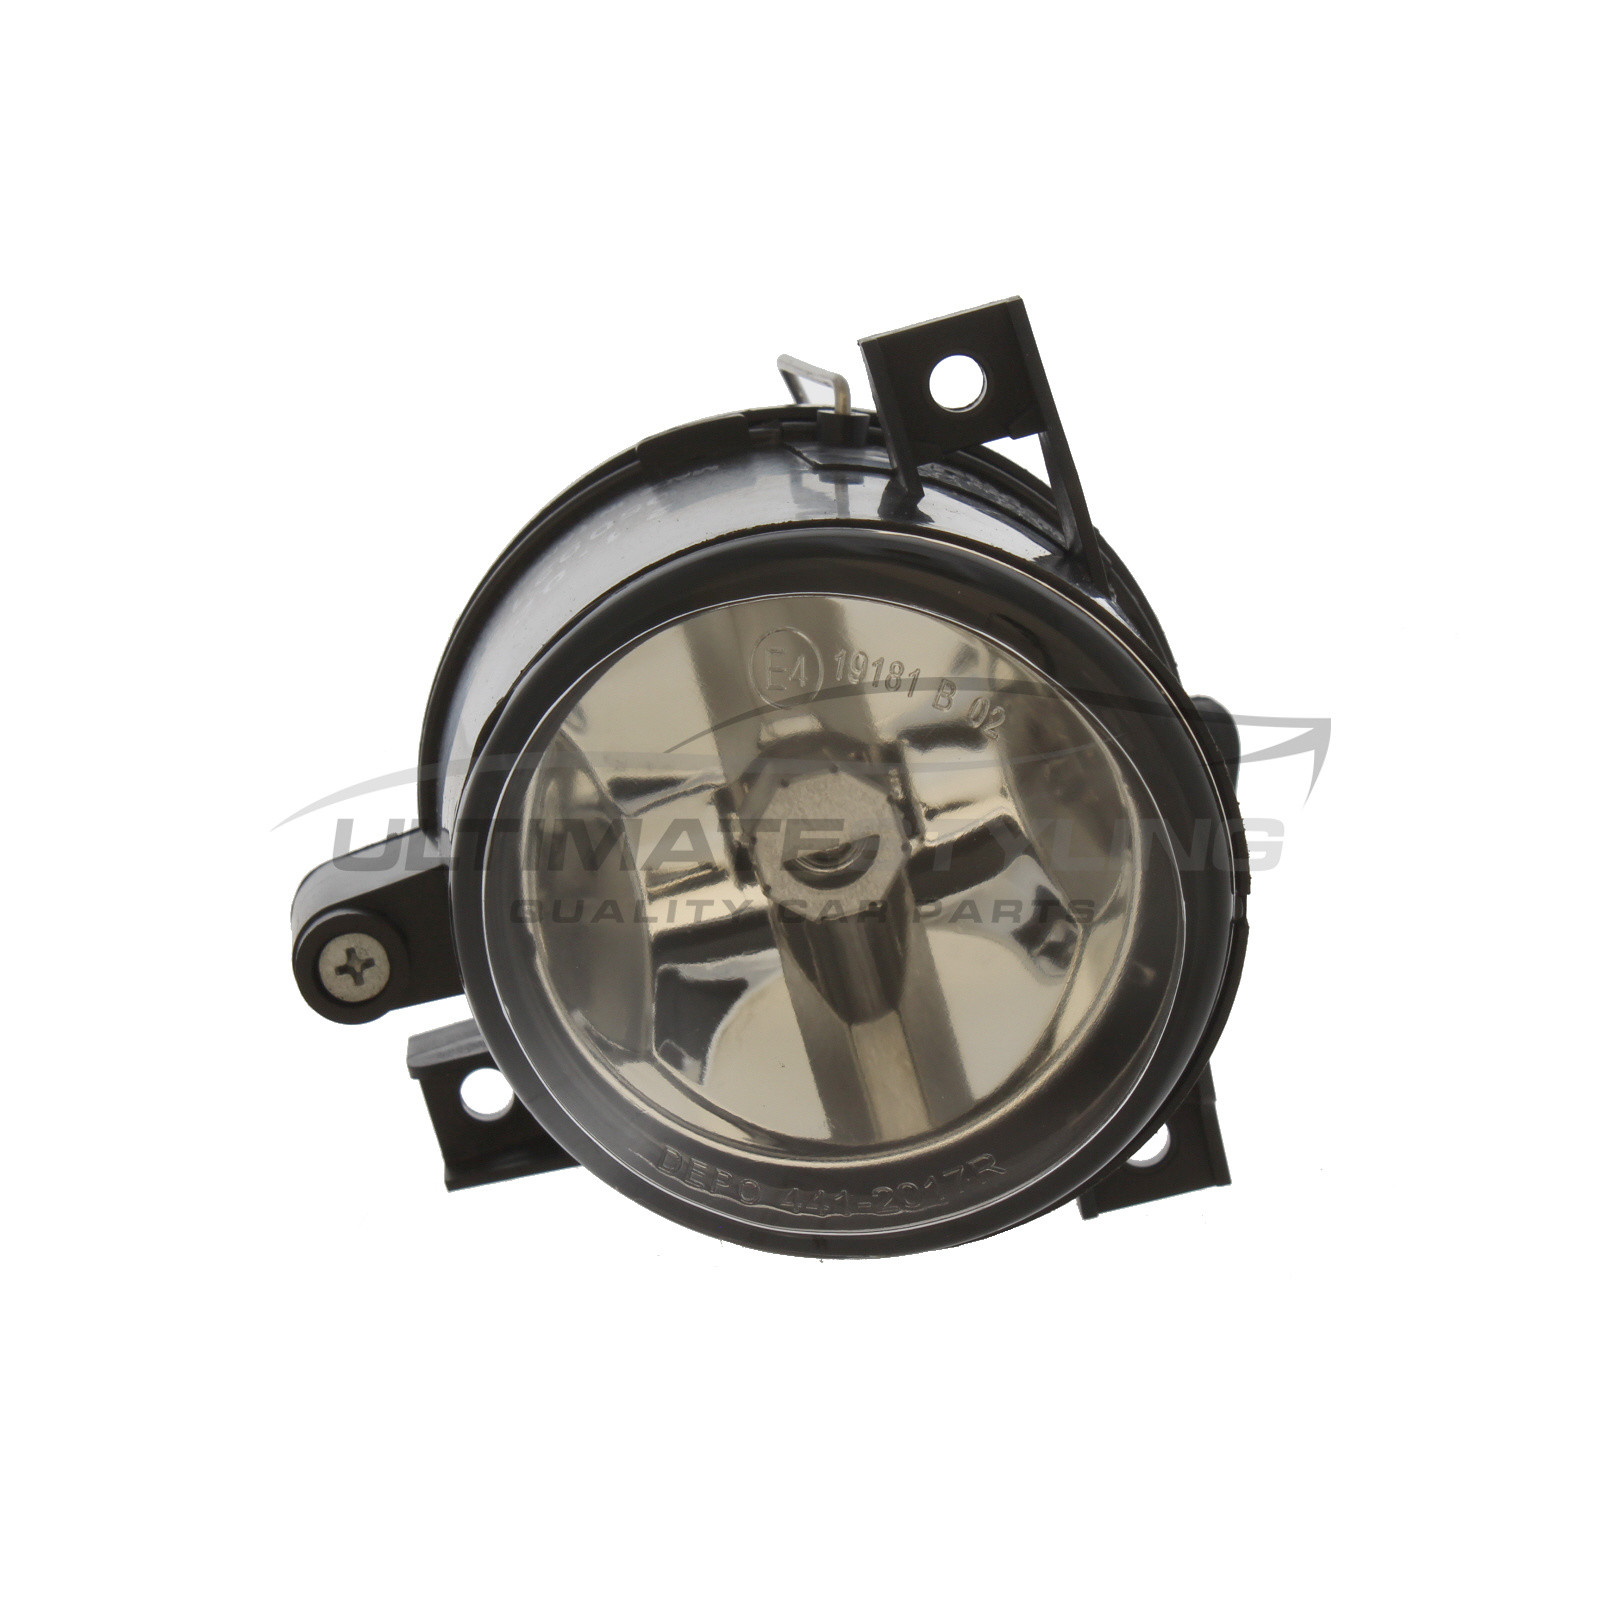 Front Fog Light - Drivers Side (RH) - Non-LED for Seat Altea / Cordoba /  Ibiza / Leon / Toledo, Volkswagen and others